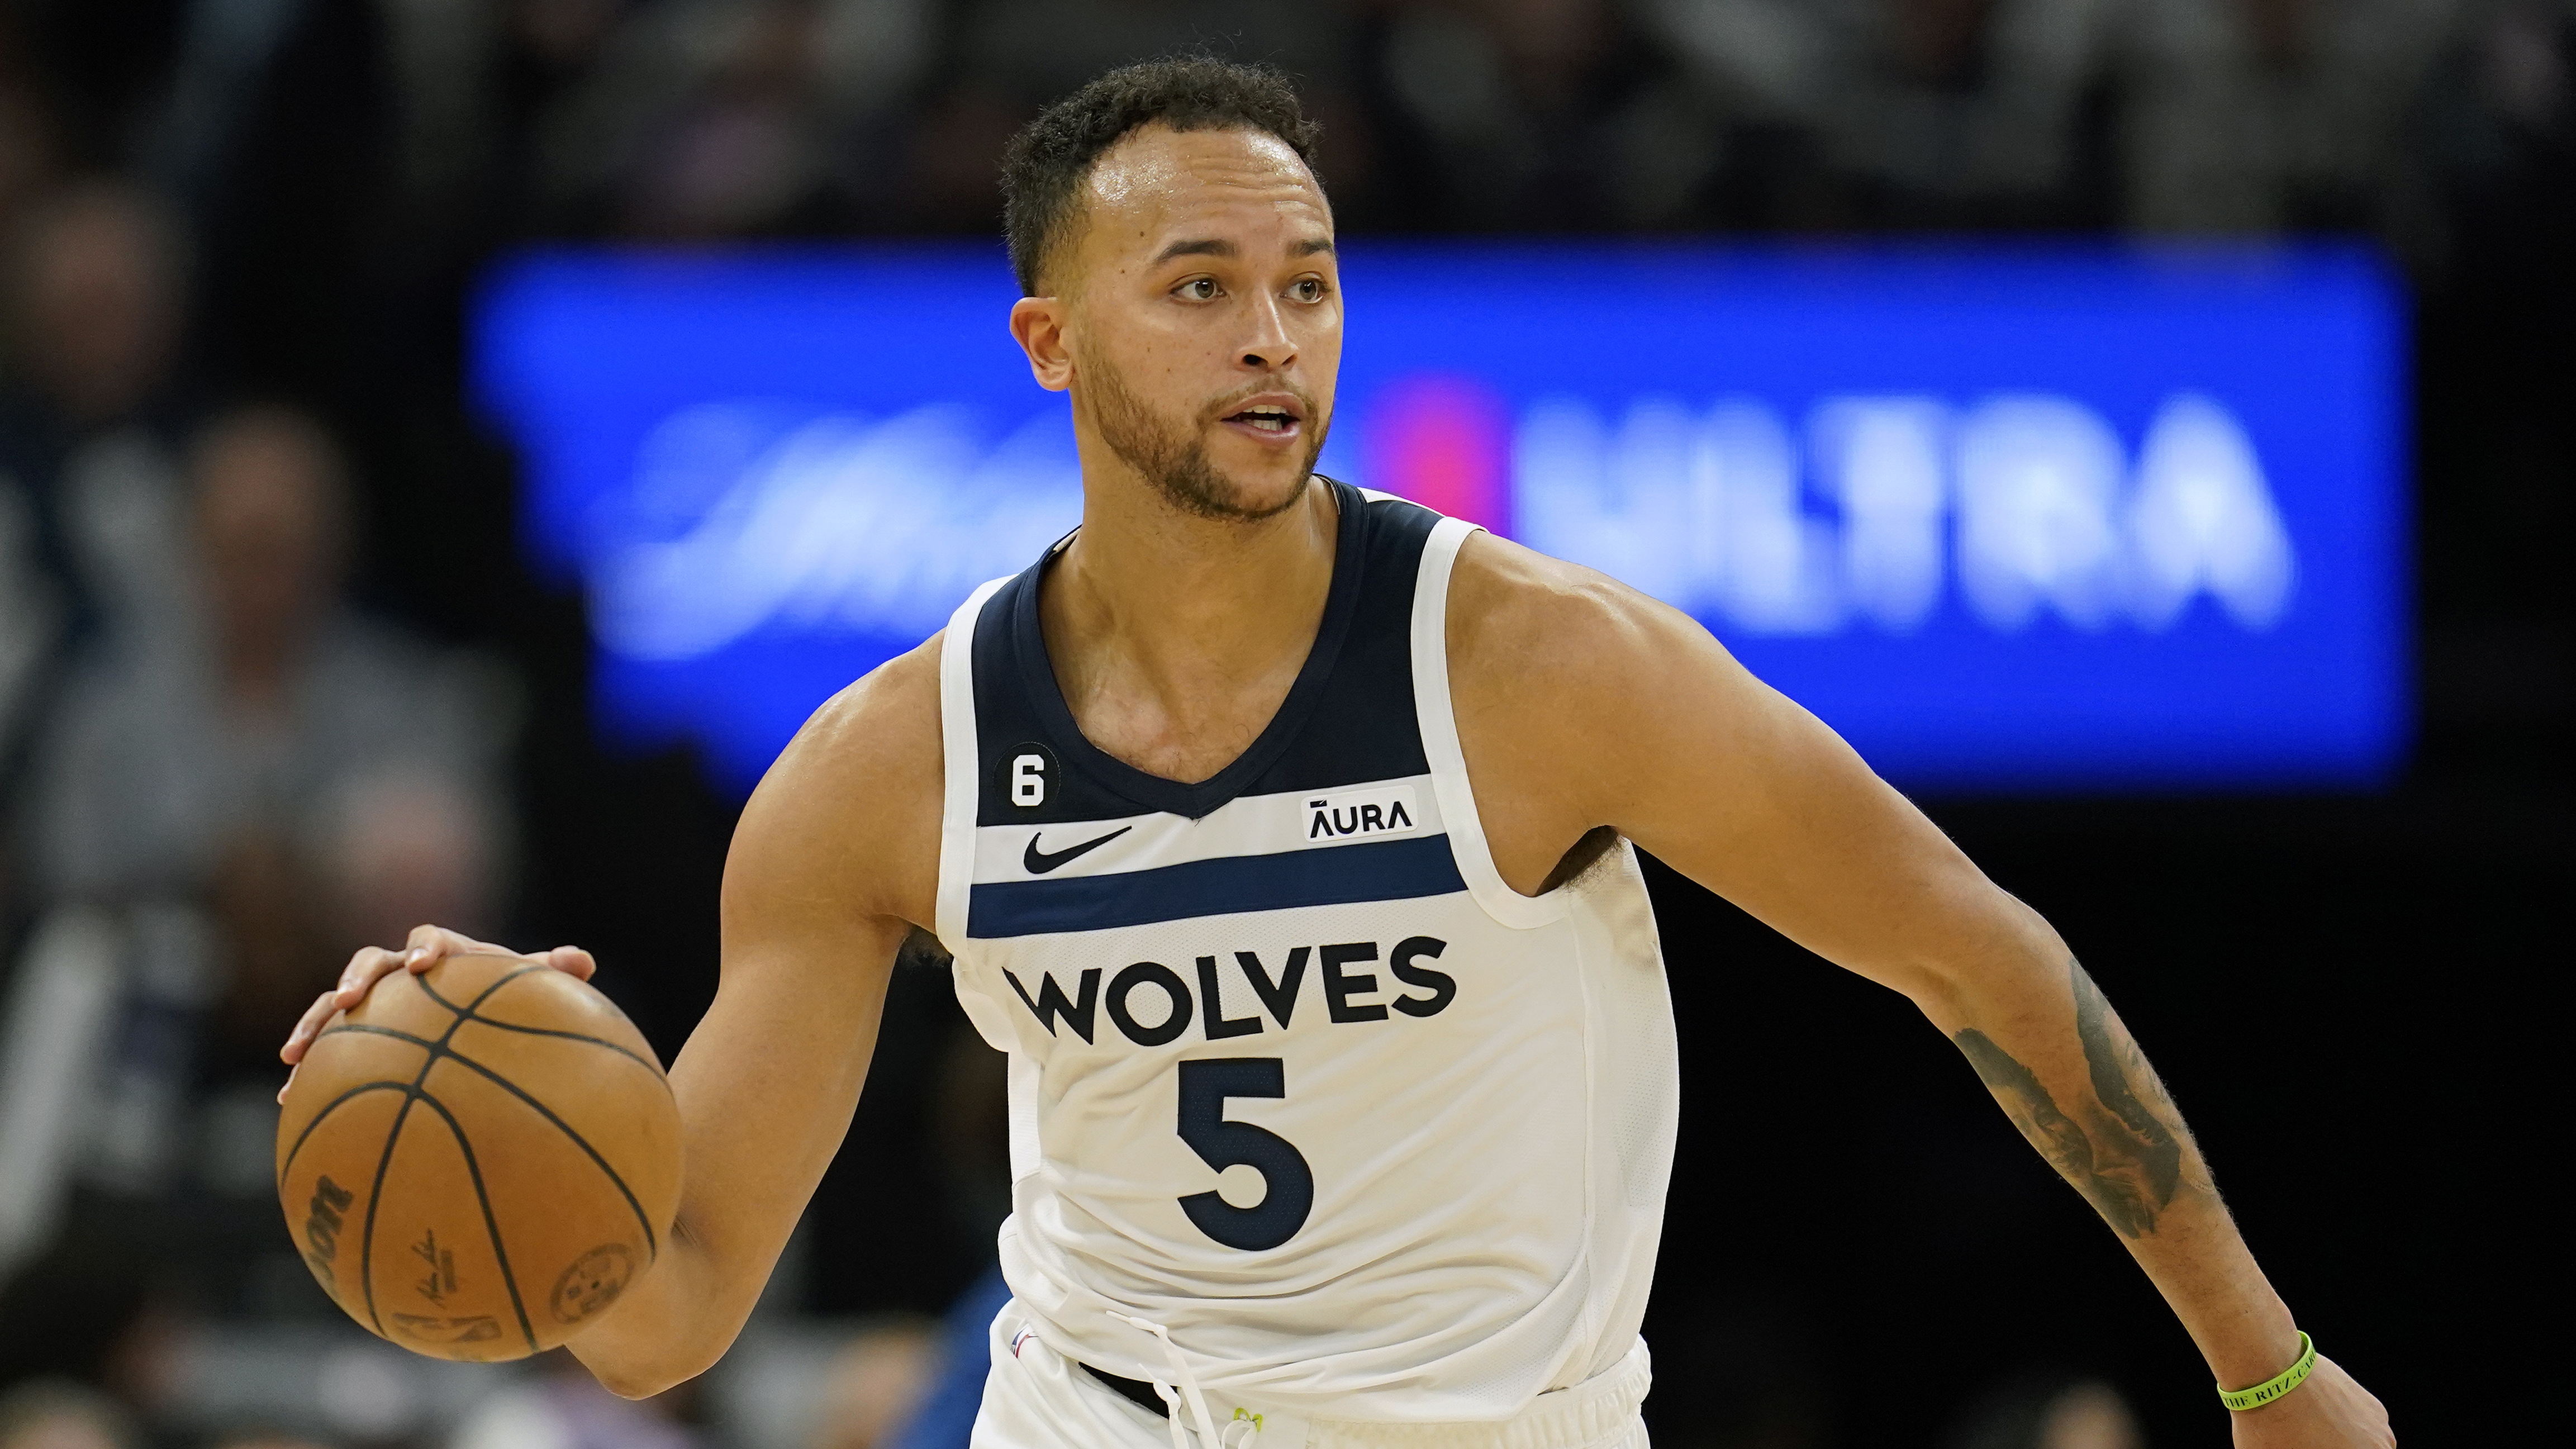 Timberwolves lose play-in game to Lakers 108-102 in OT, season on